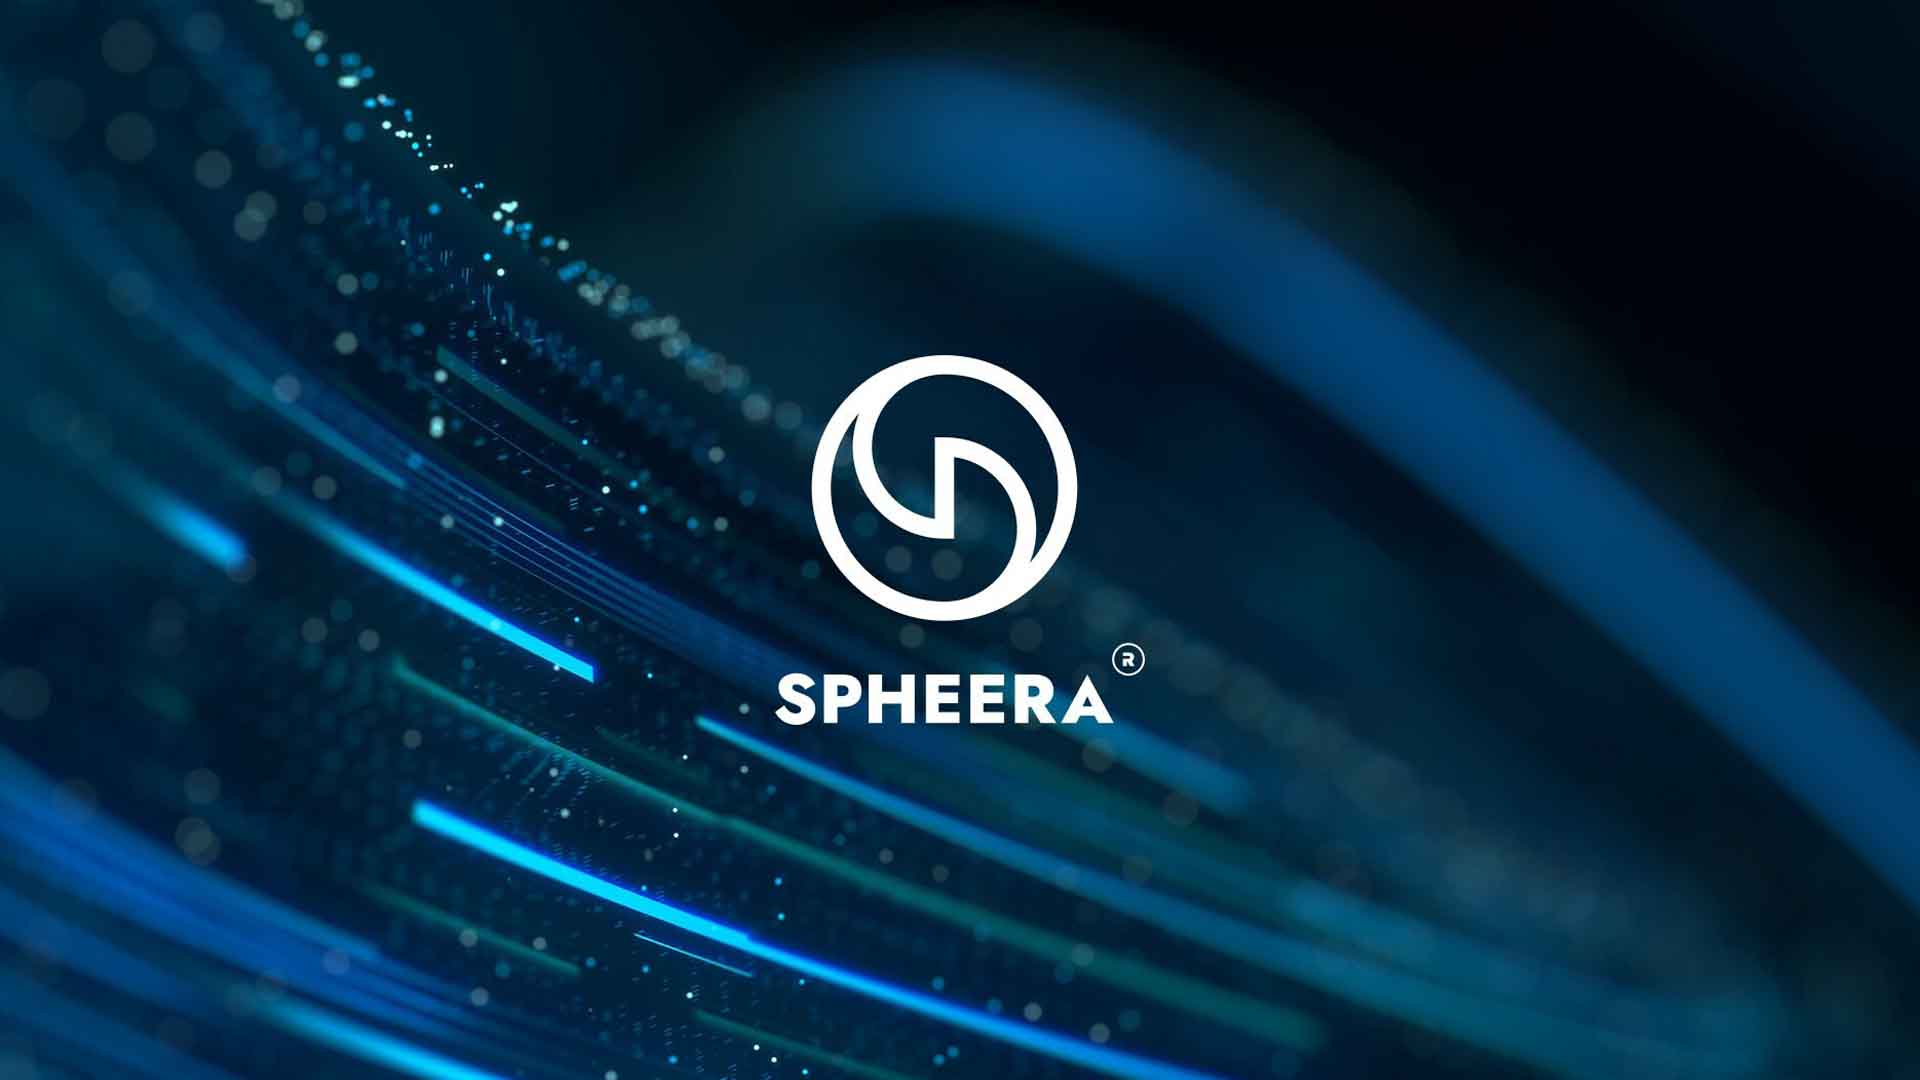 THIS JULY 4, RYFF’S SPHEERA™ PLATFORM LAUNCH LIBERATES BRANDS AND CONTENT